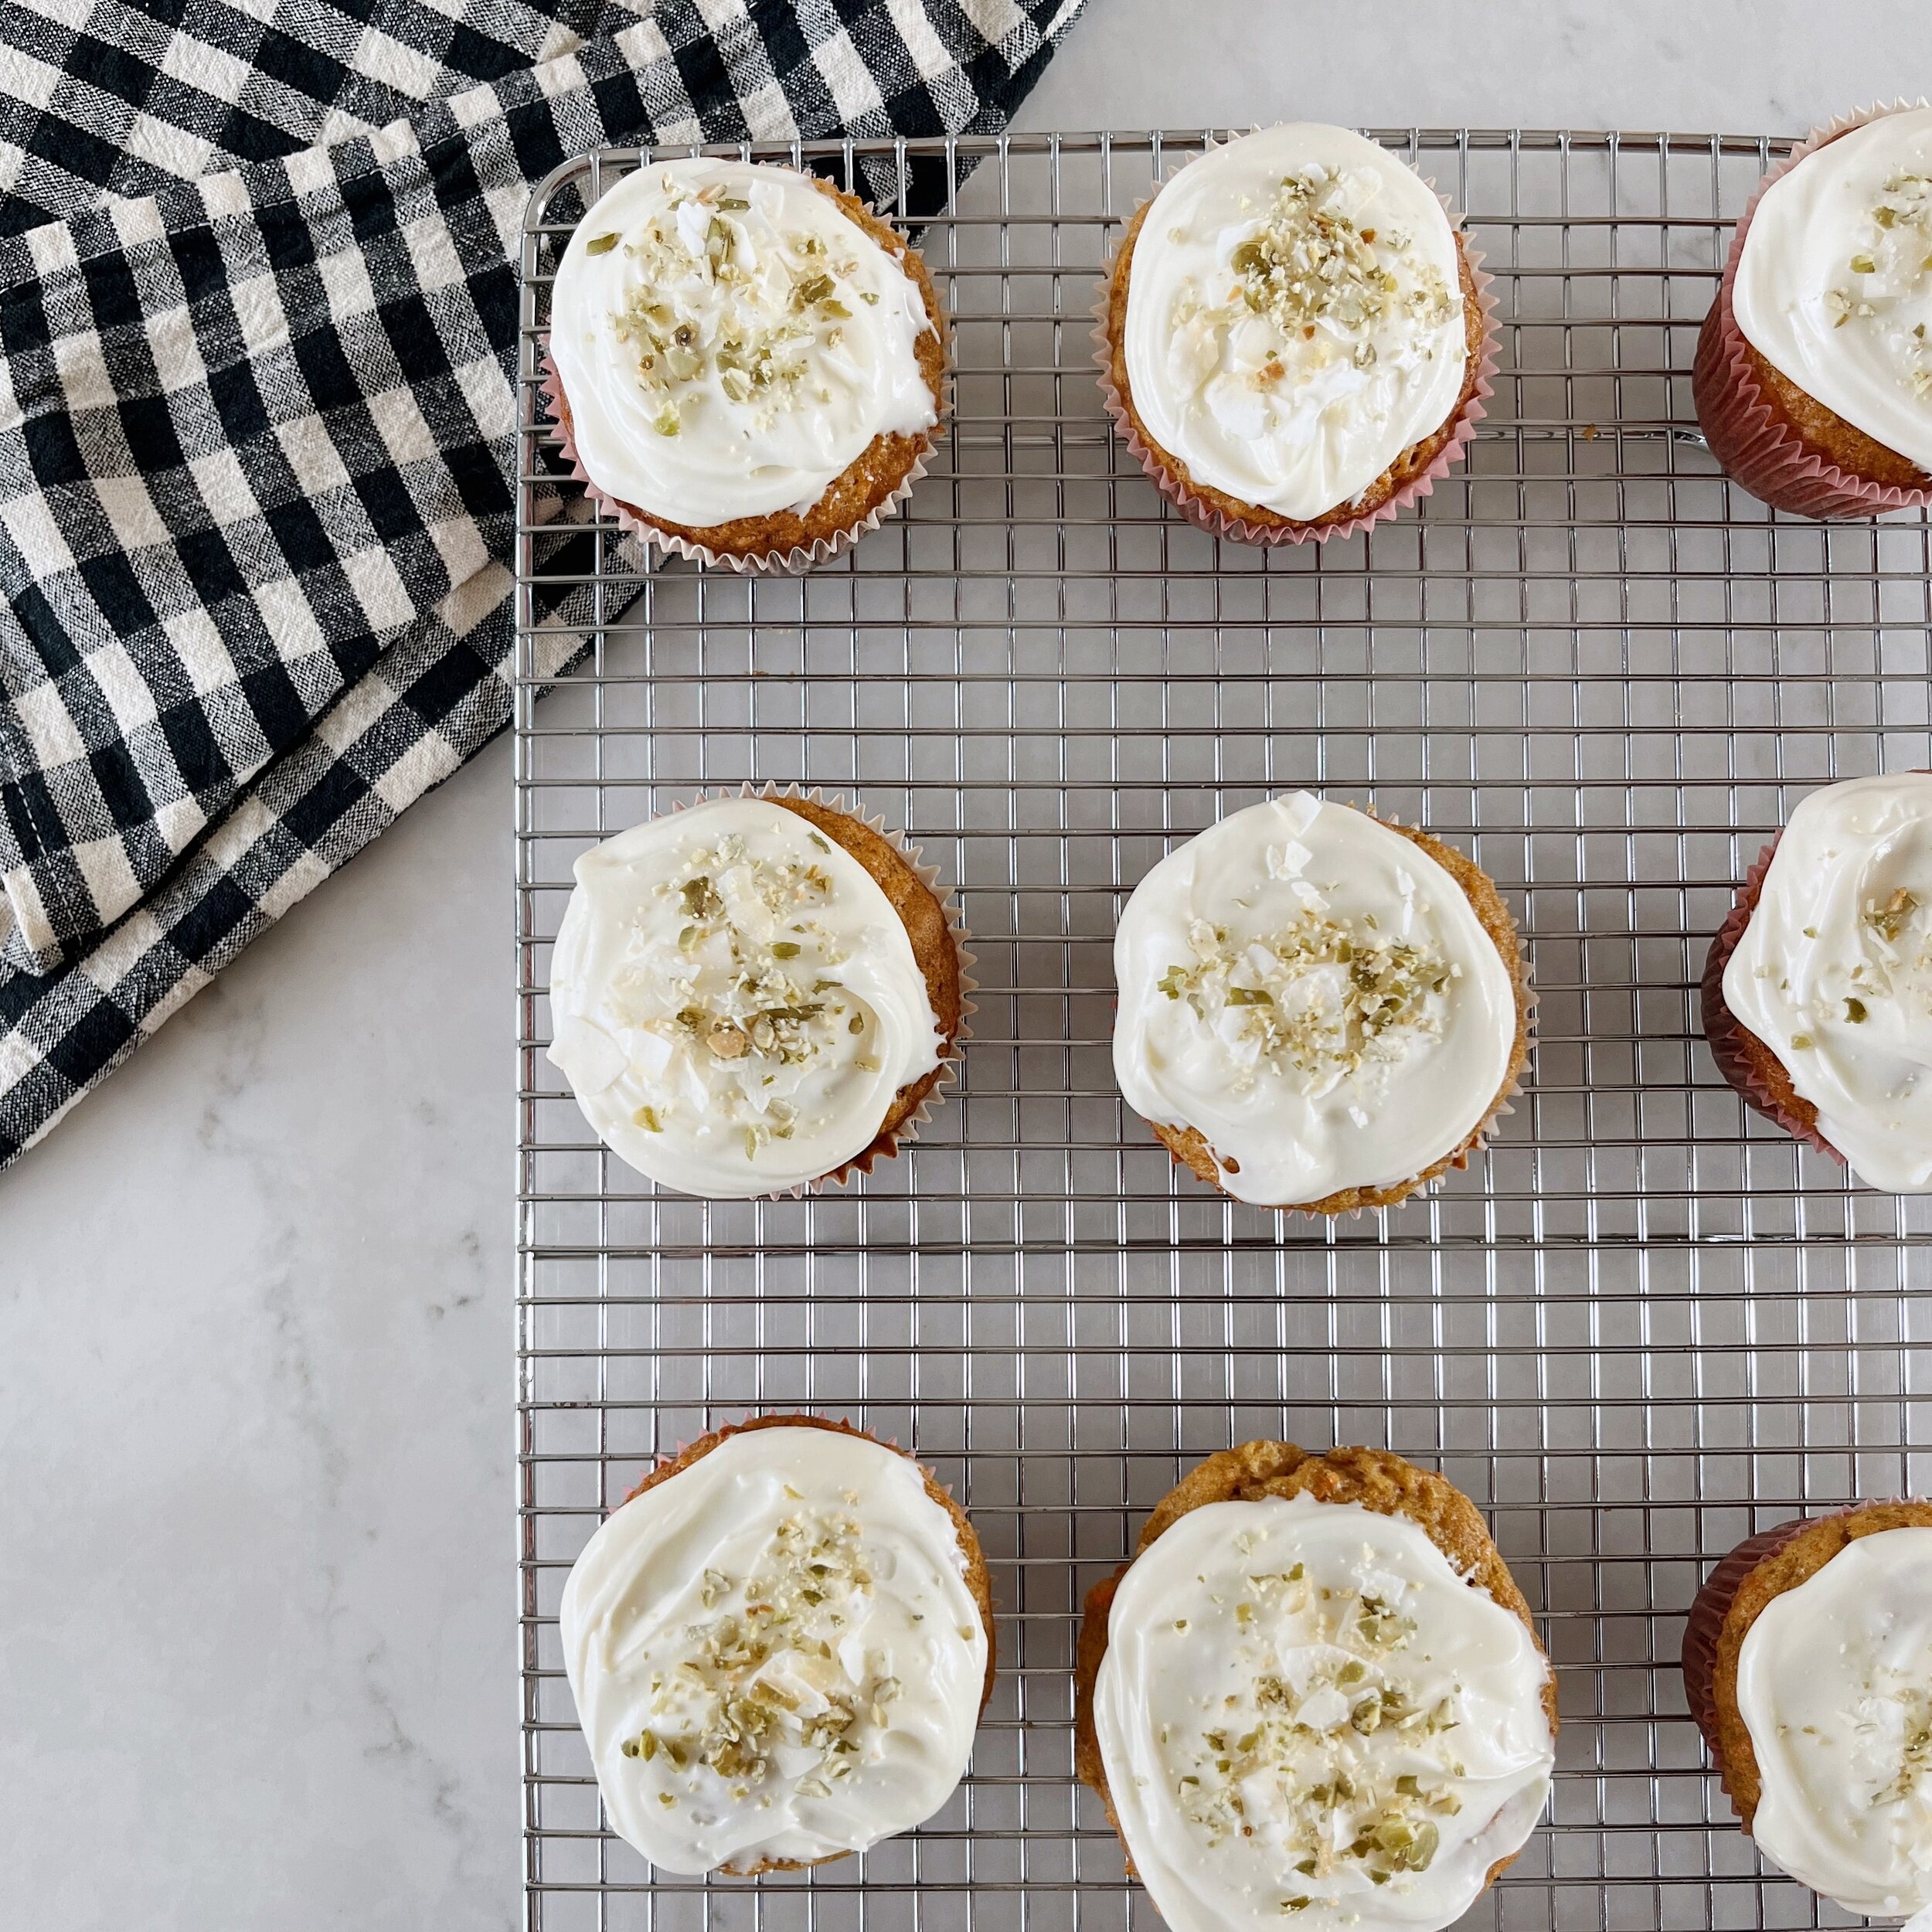 The Carrot Cake Cupcakes 🥕 I made a few days ago did not disappoint. They feel very Easter-y and perfect for spring. Would be great for the holiday weekend! I topped mine with a little unsweetened coconut flakes and crushed pepitas. Recipe is by @lo